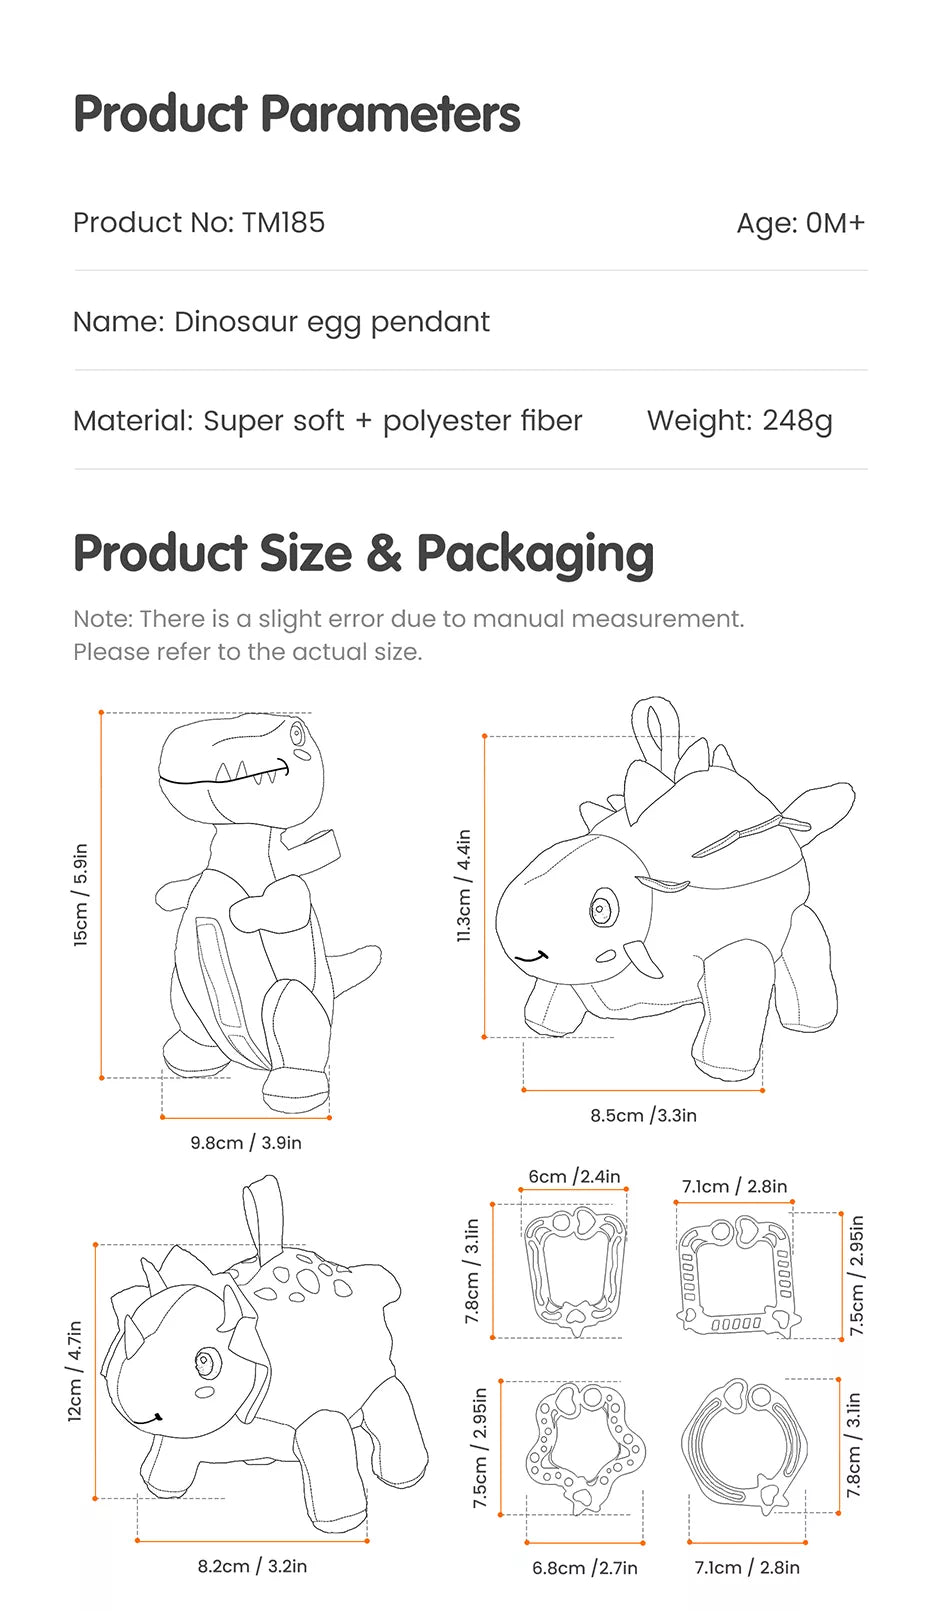 Stuffed dinosaur toy product parameters